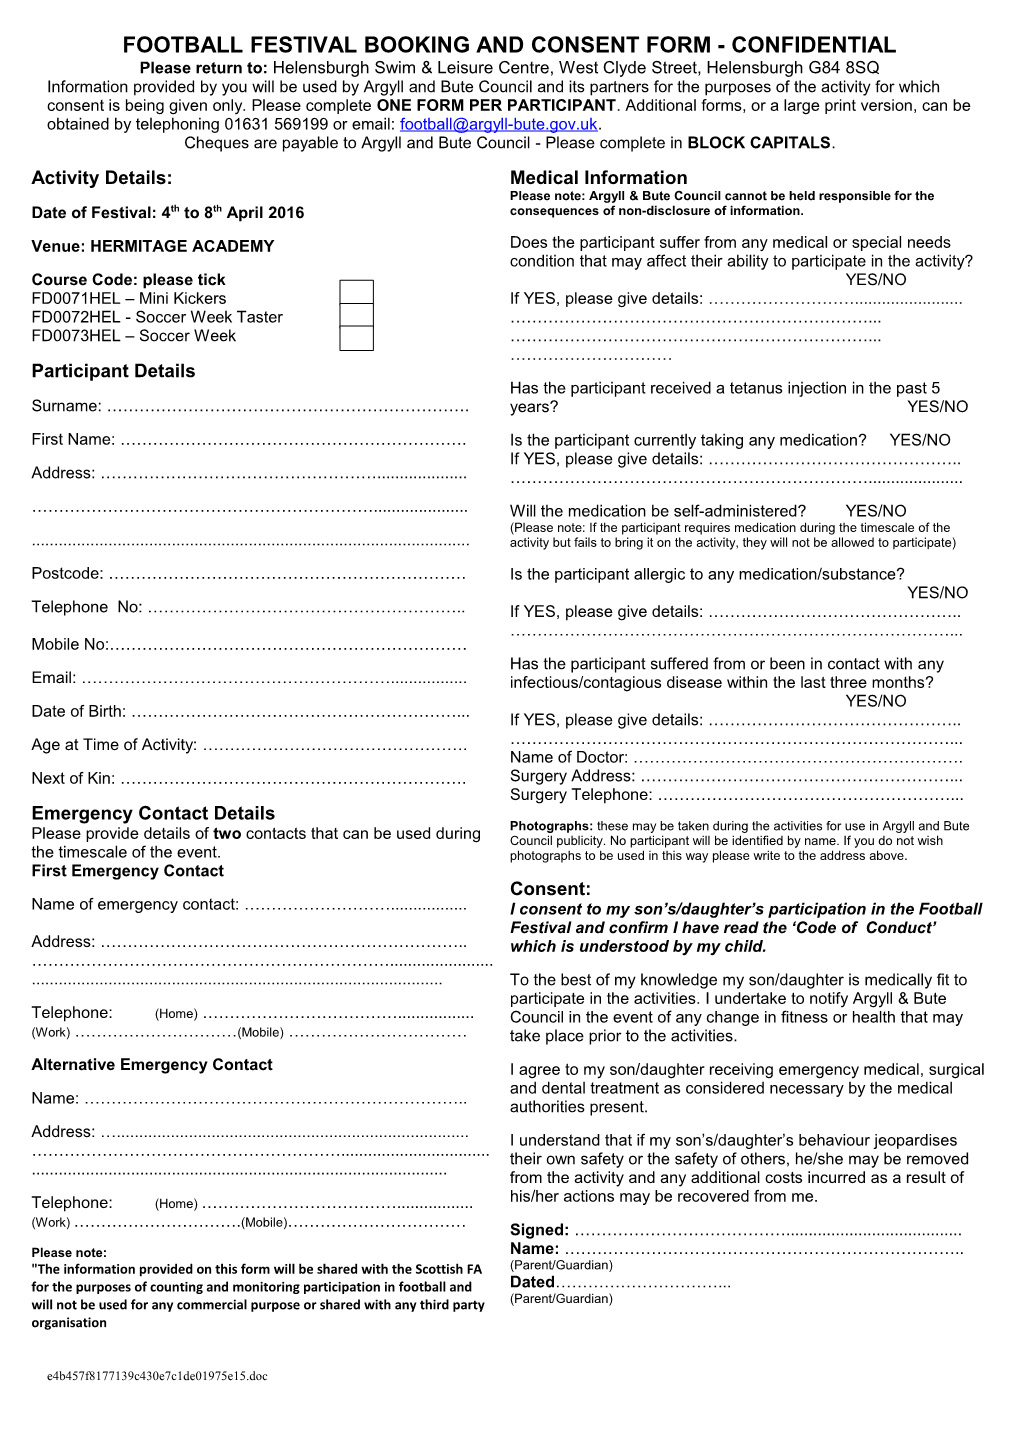 Stramash Consent Form- Confidential